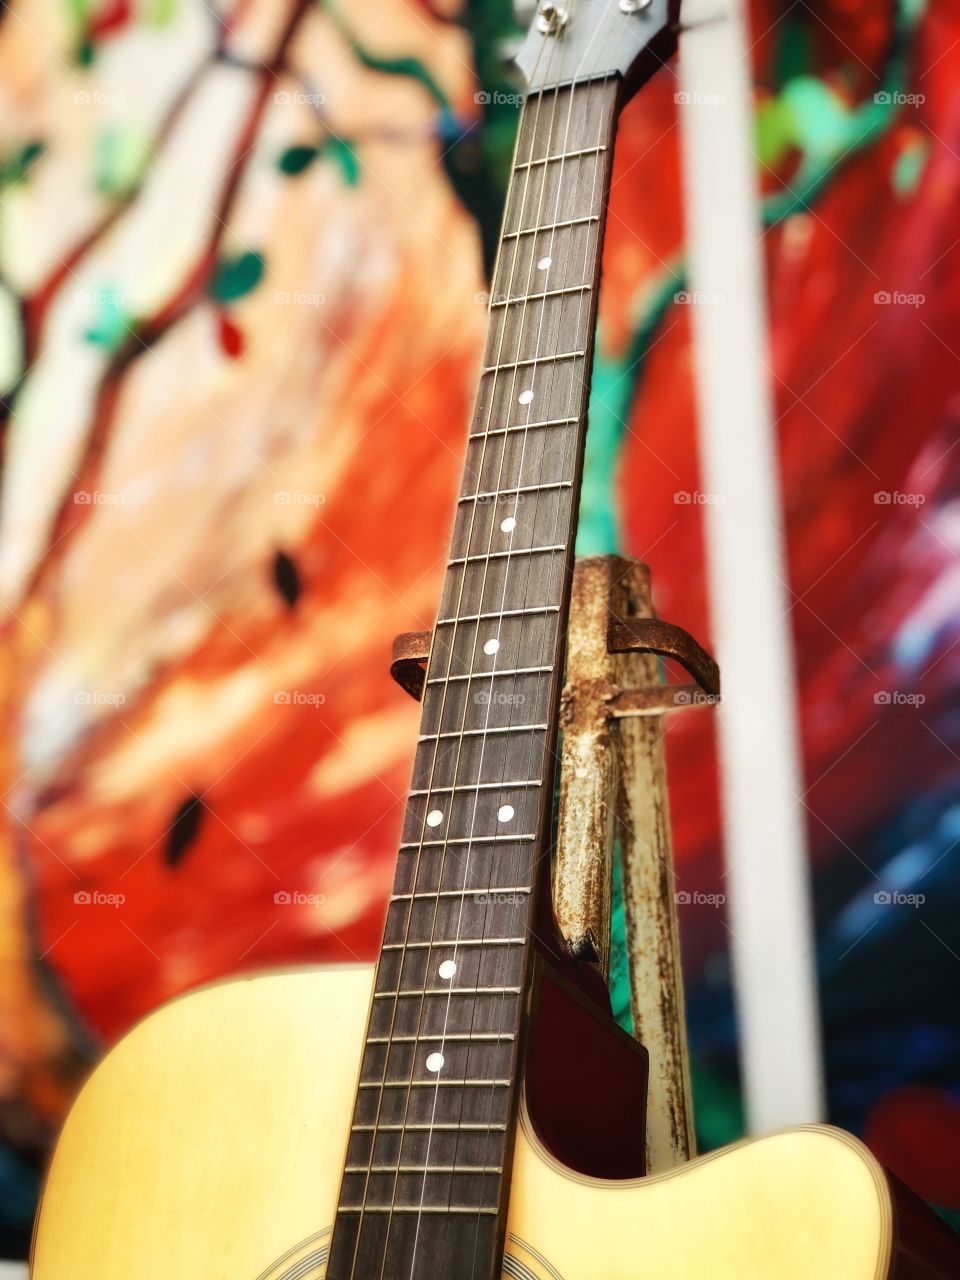 Lovely guitar against colorful background 